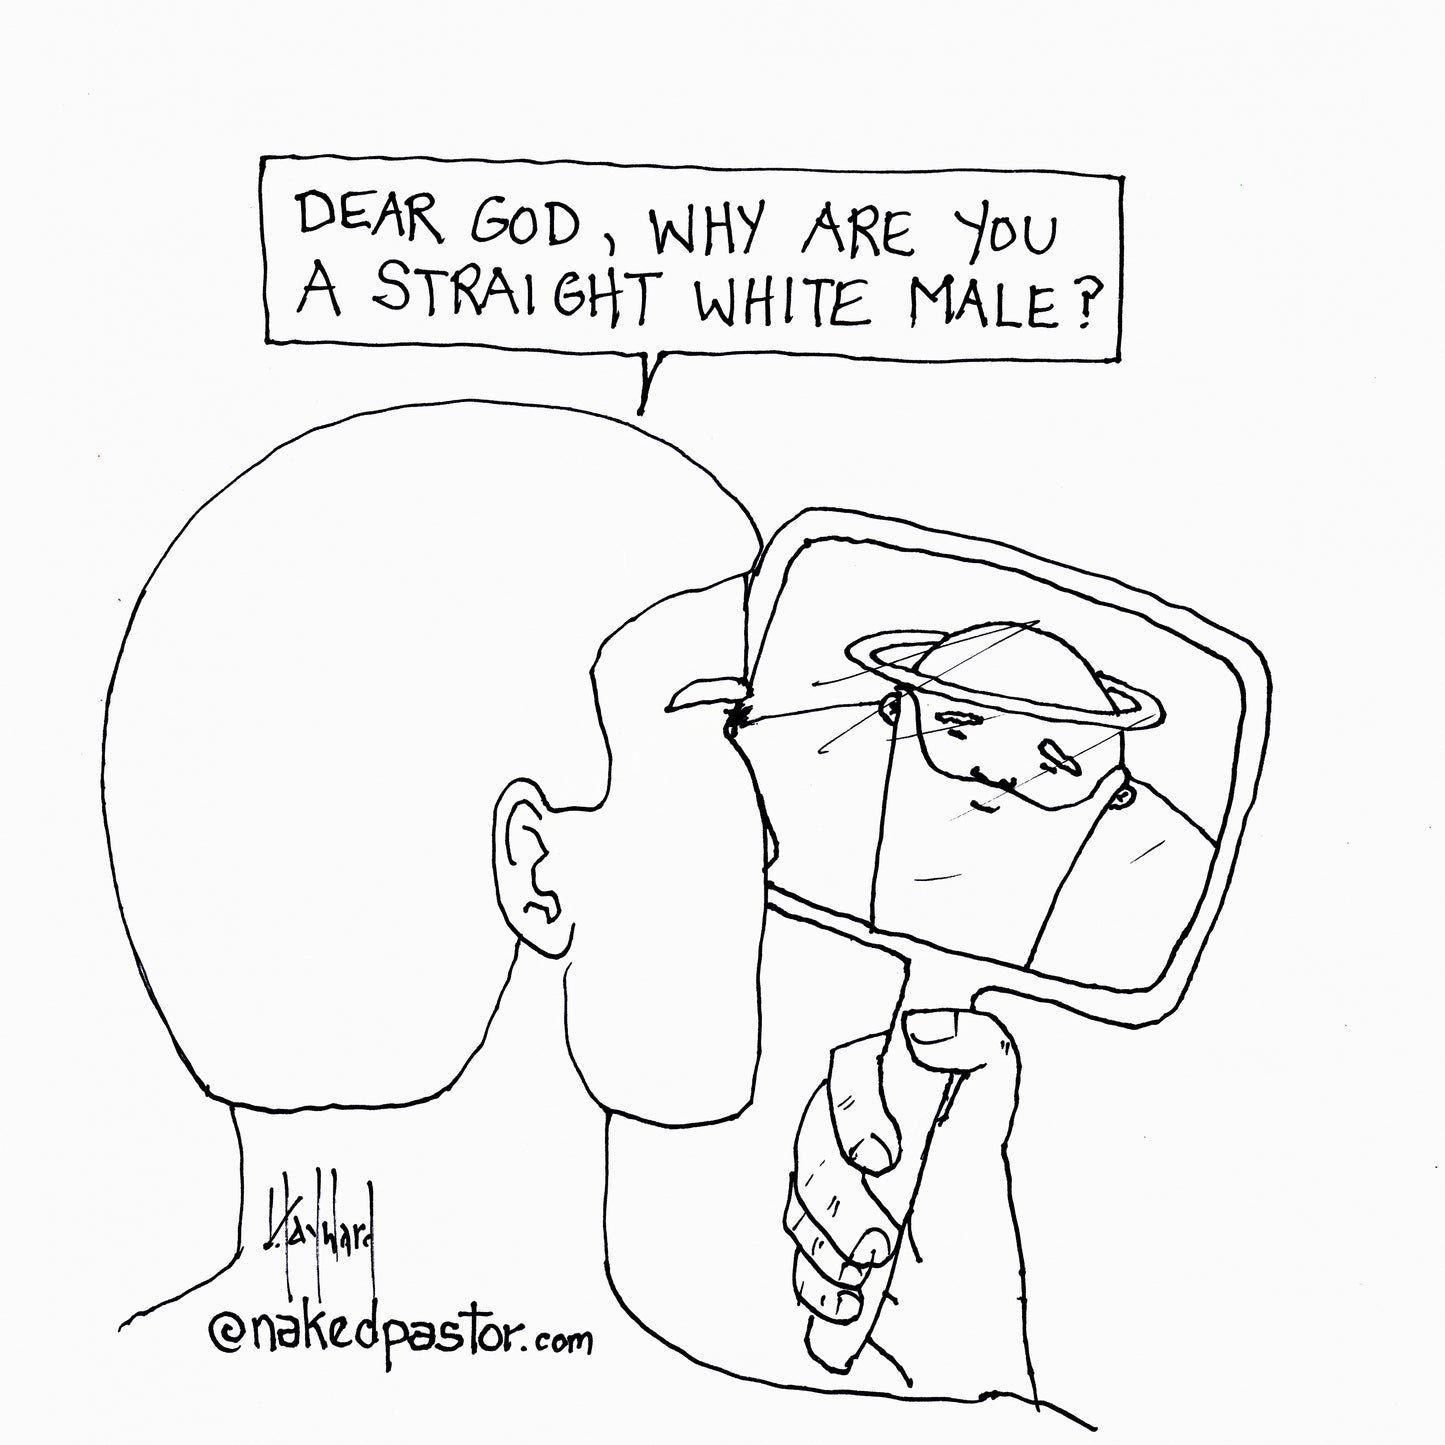 Is Your God a Straight White Male? Digital Cartoon